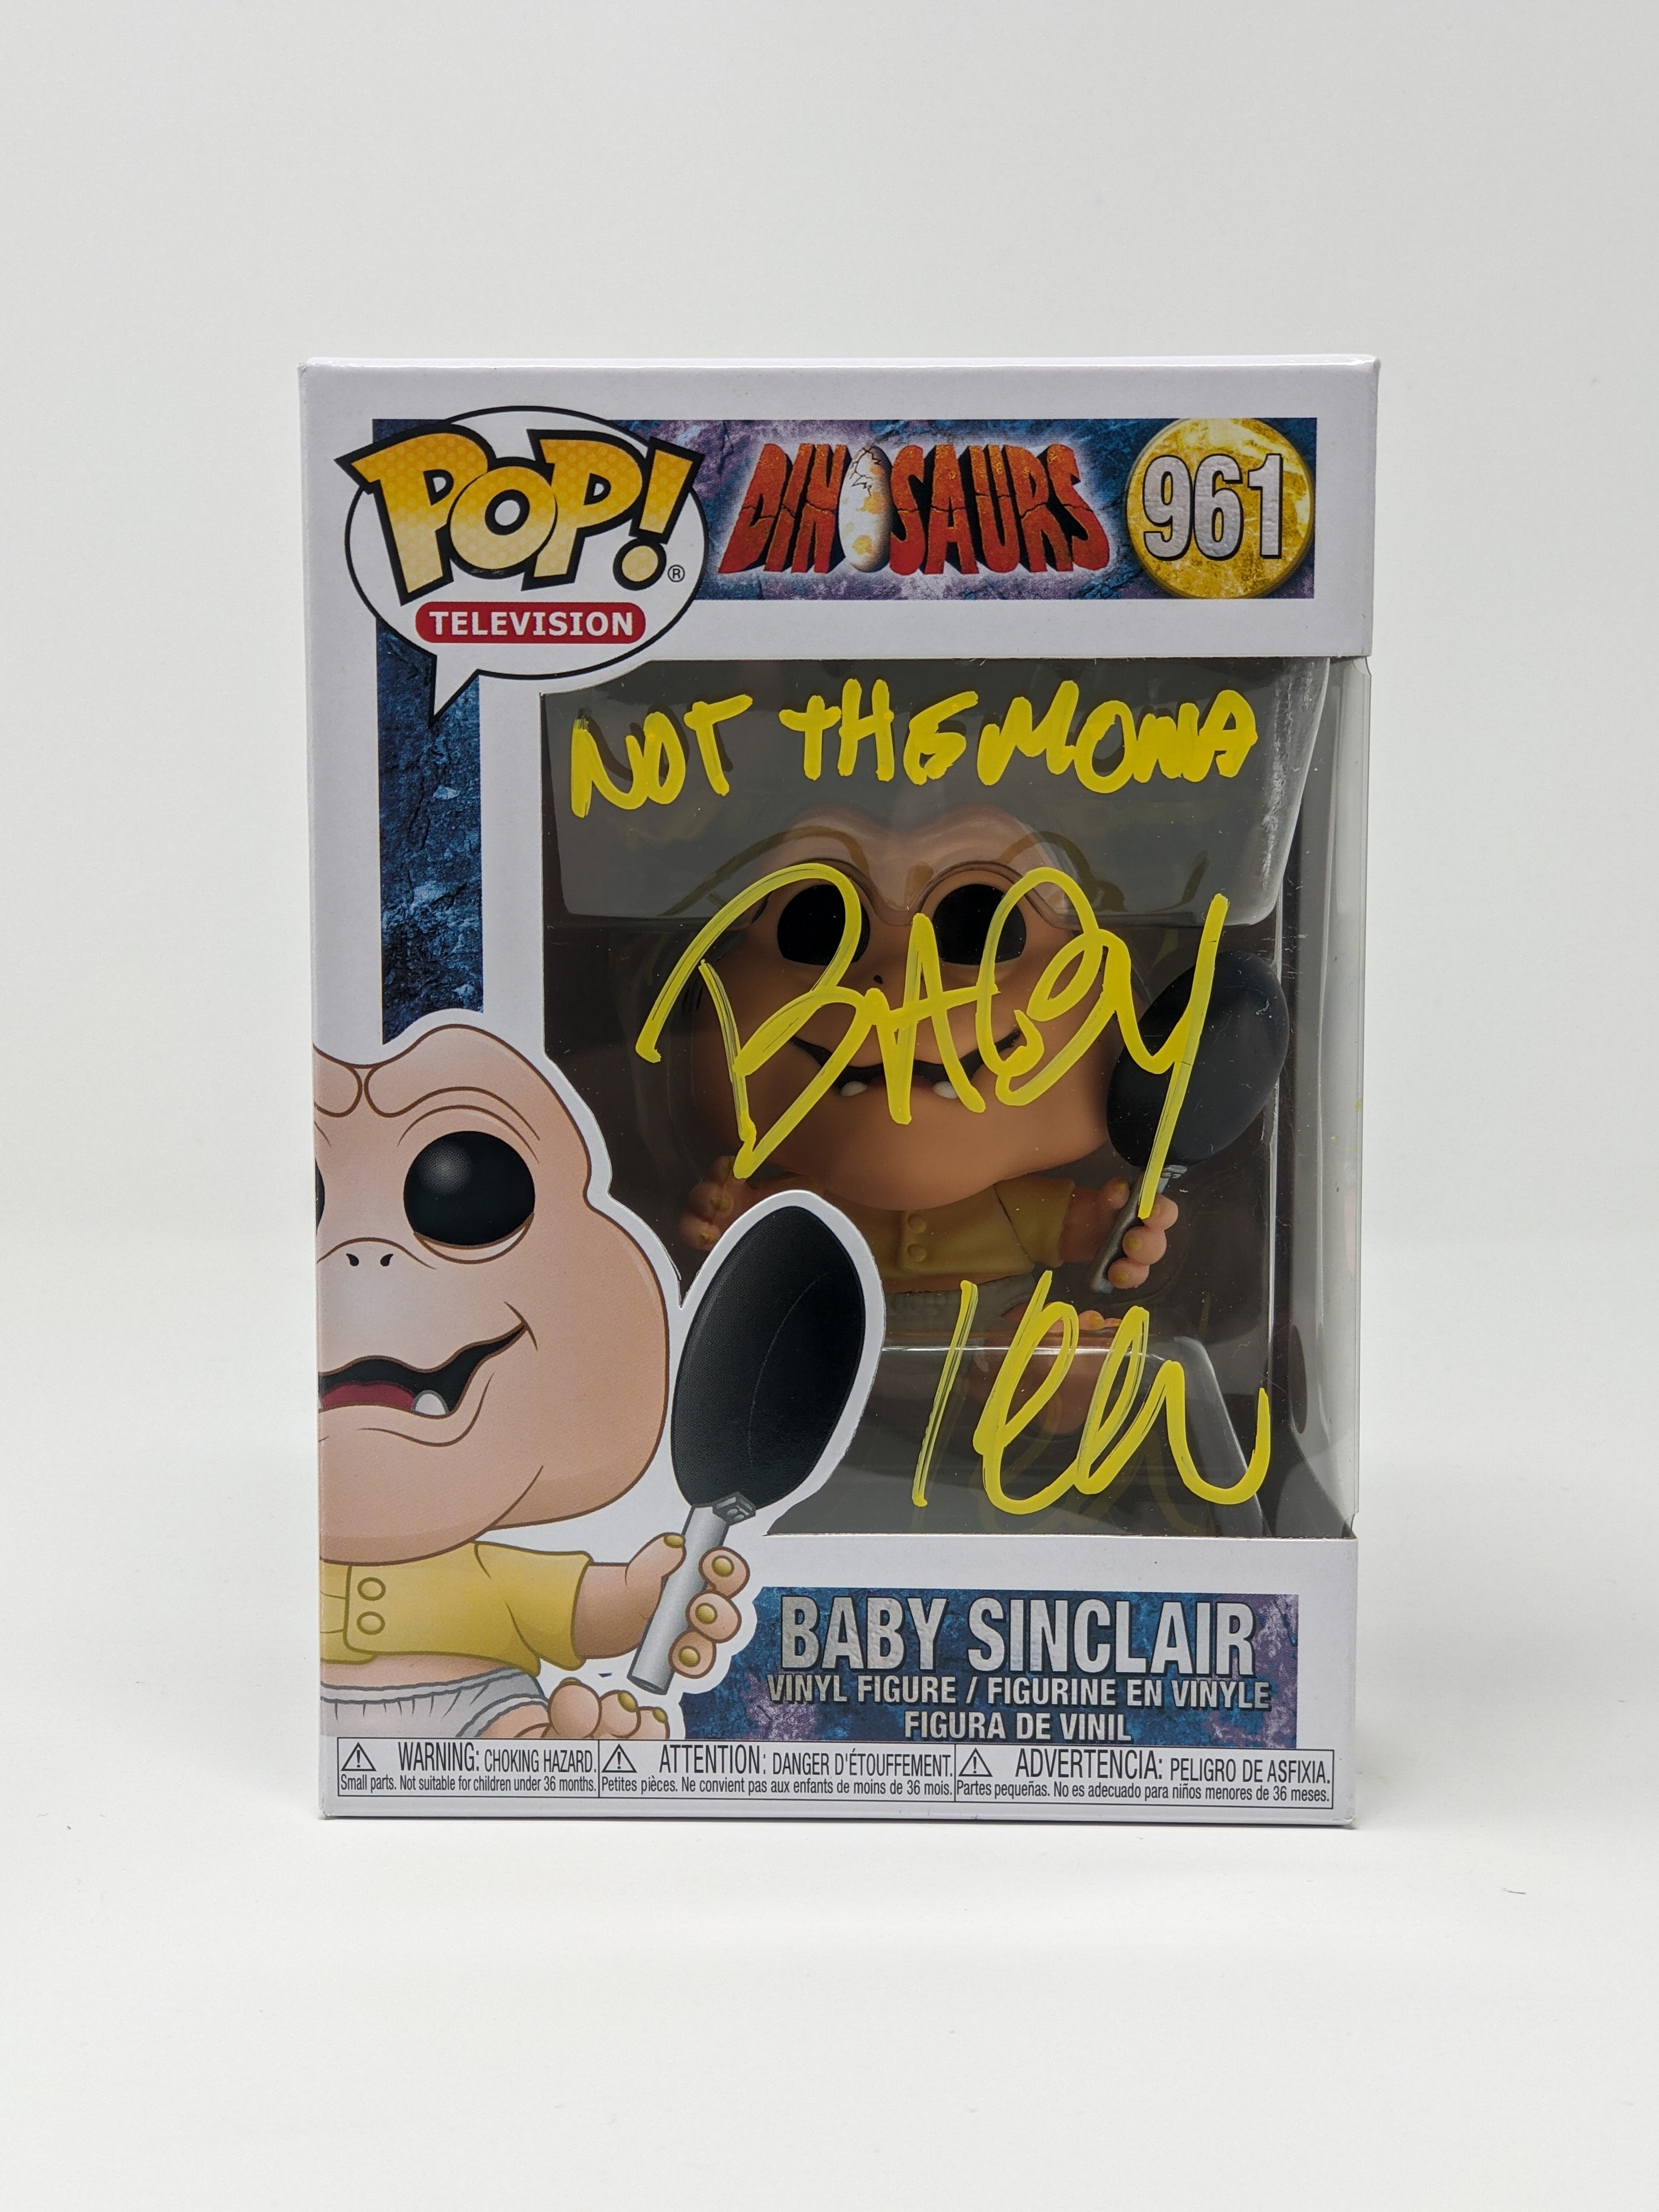 Kevin Clash Dinosaurs Baby Sinclair #961 Signed Funko Pop JSA COA Certified Autograph GalaxyCon